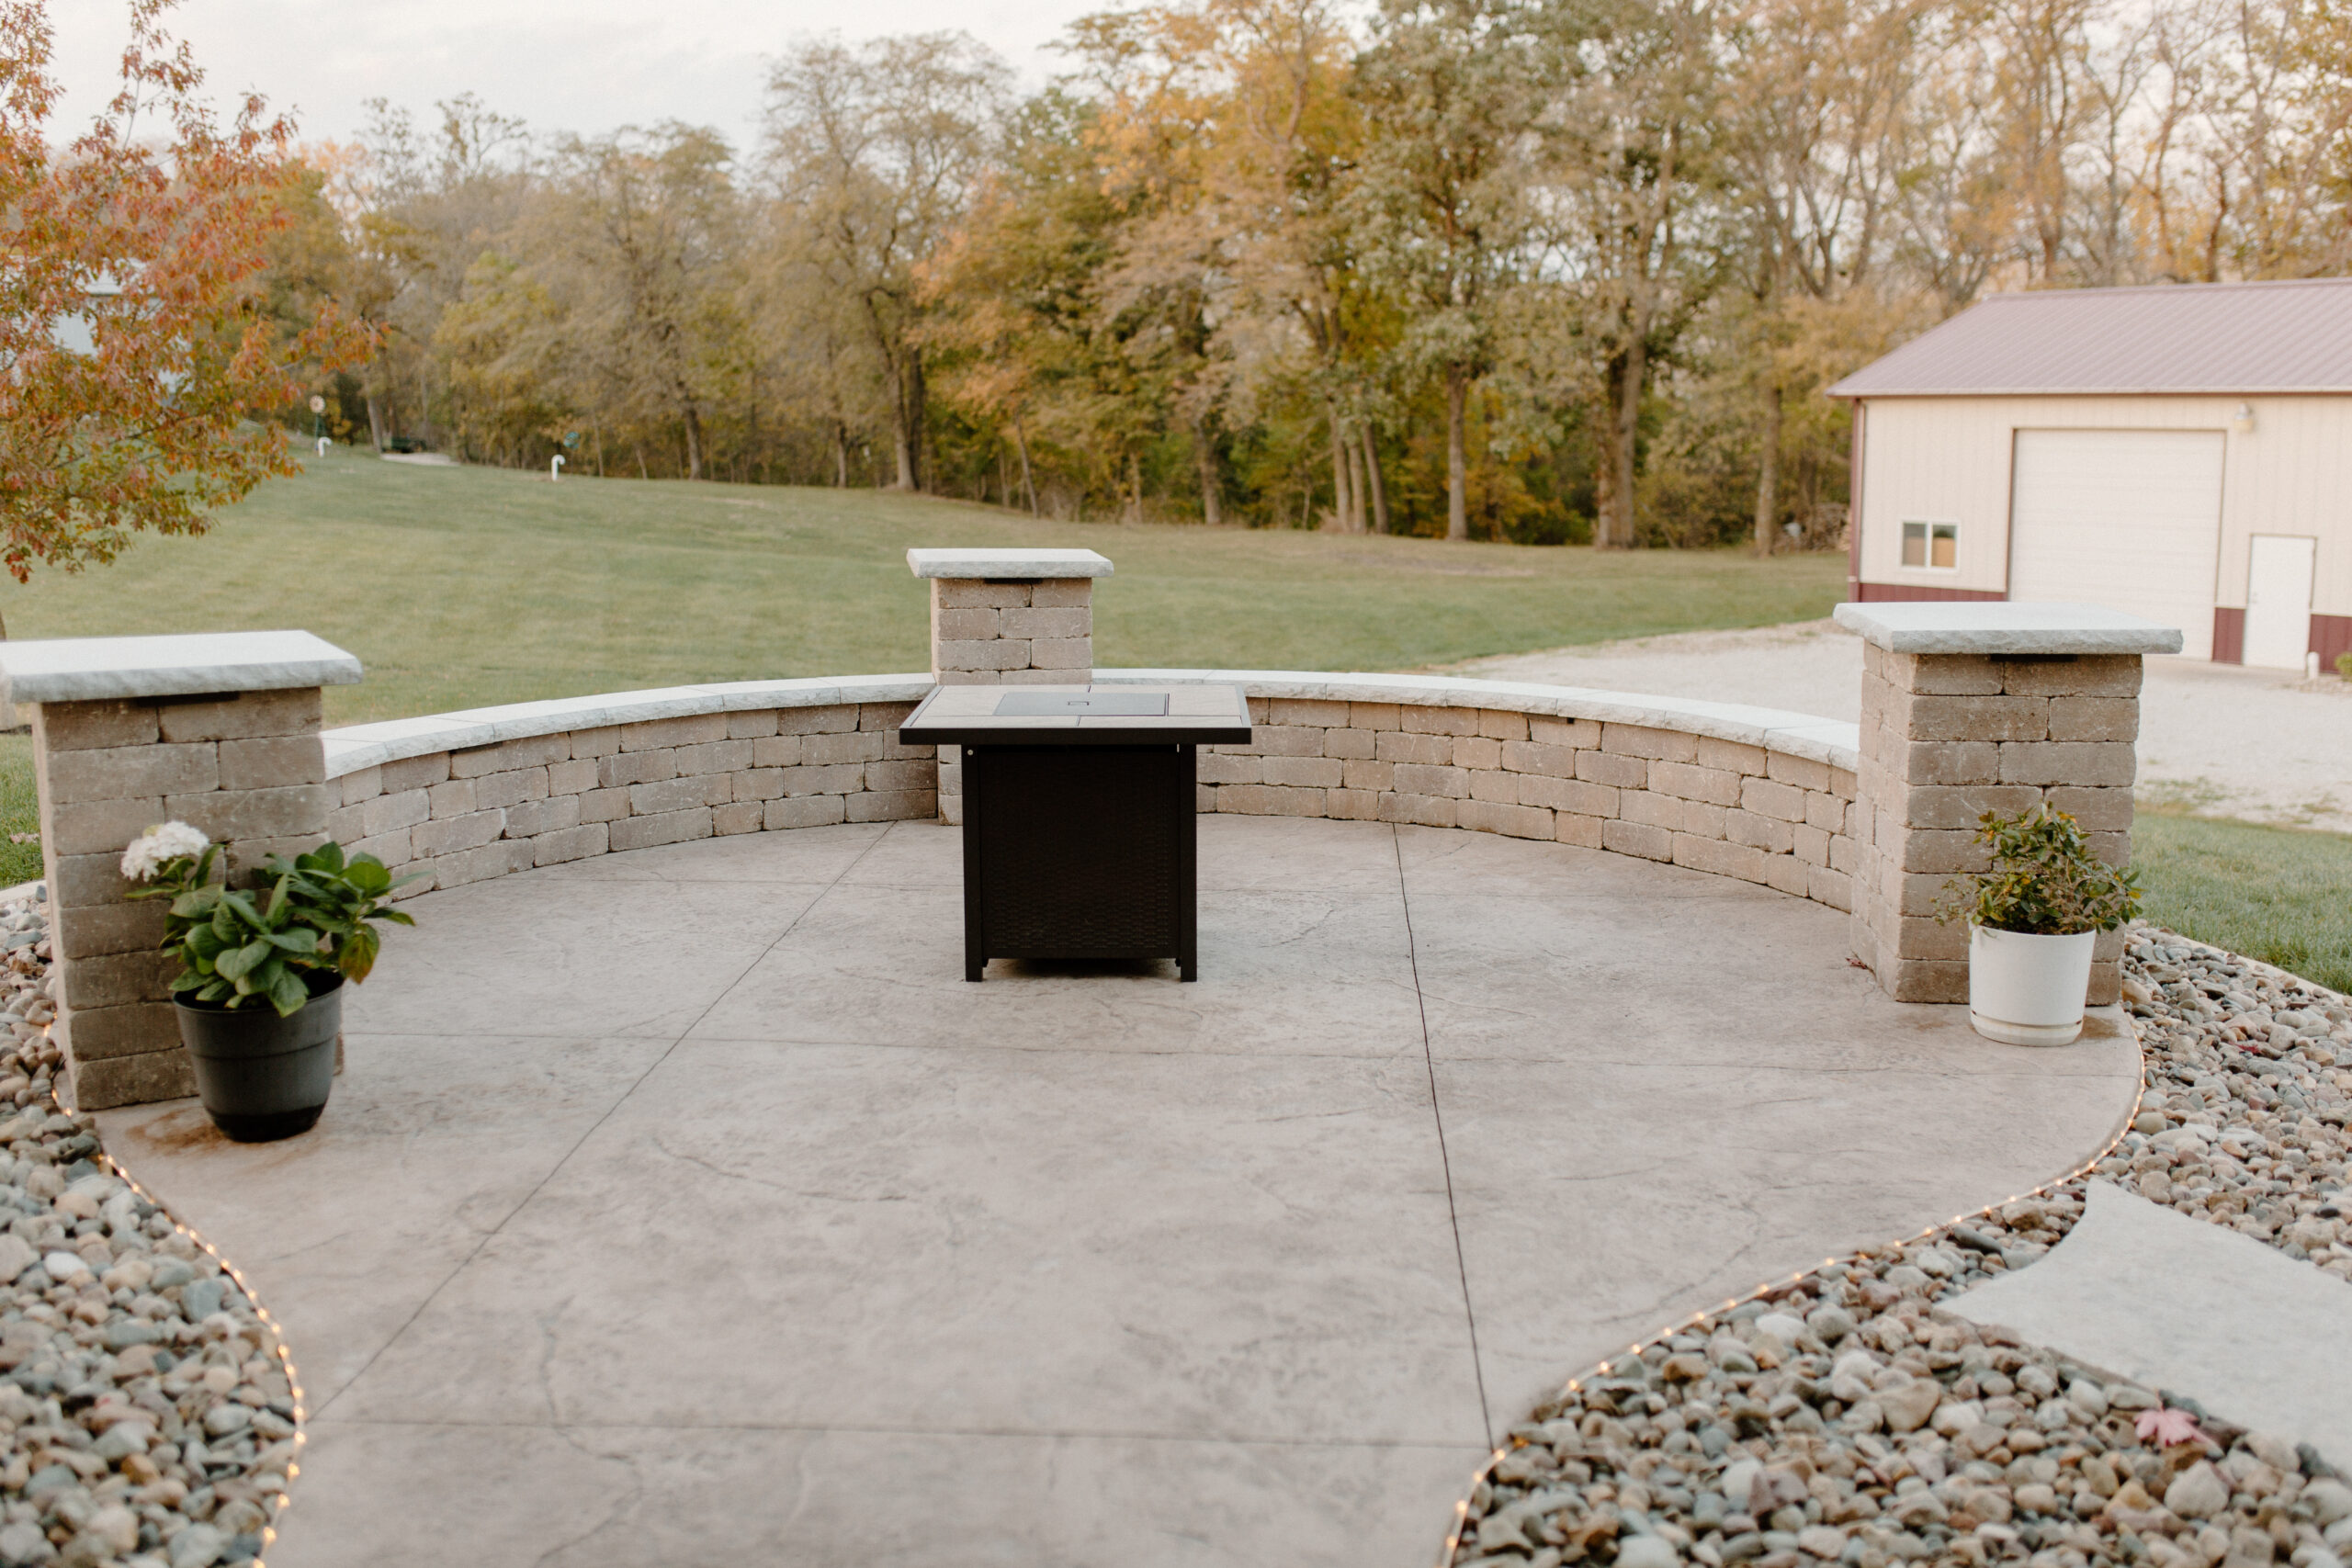 Final product with firepit with seating surround. Creative Nature Des Moines